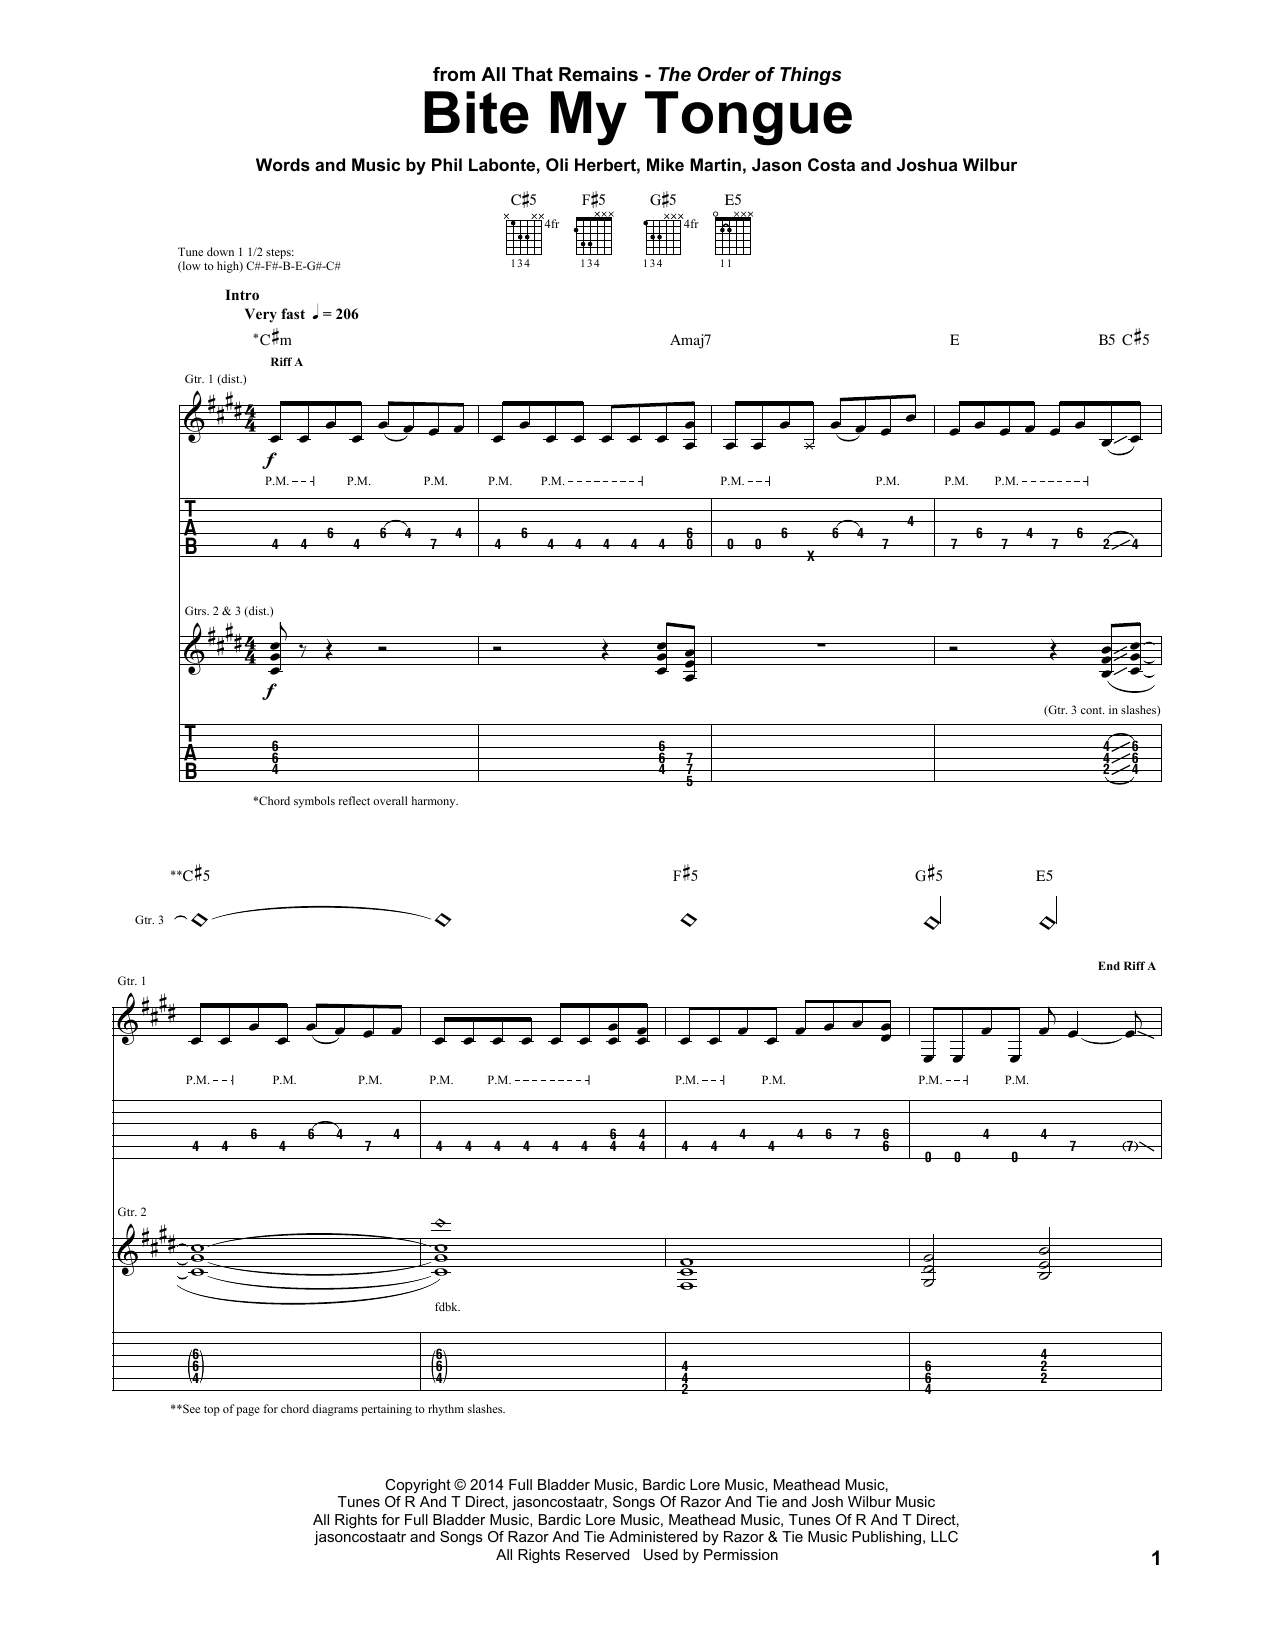 Download All That Remains Bite My Tongue Sheet Music